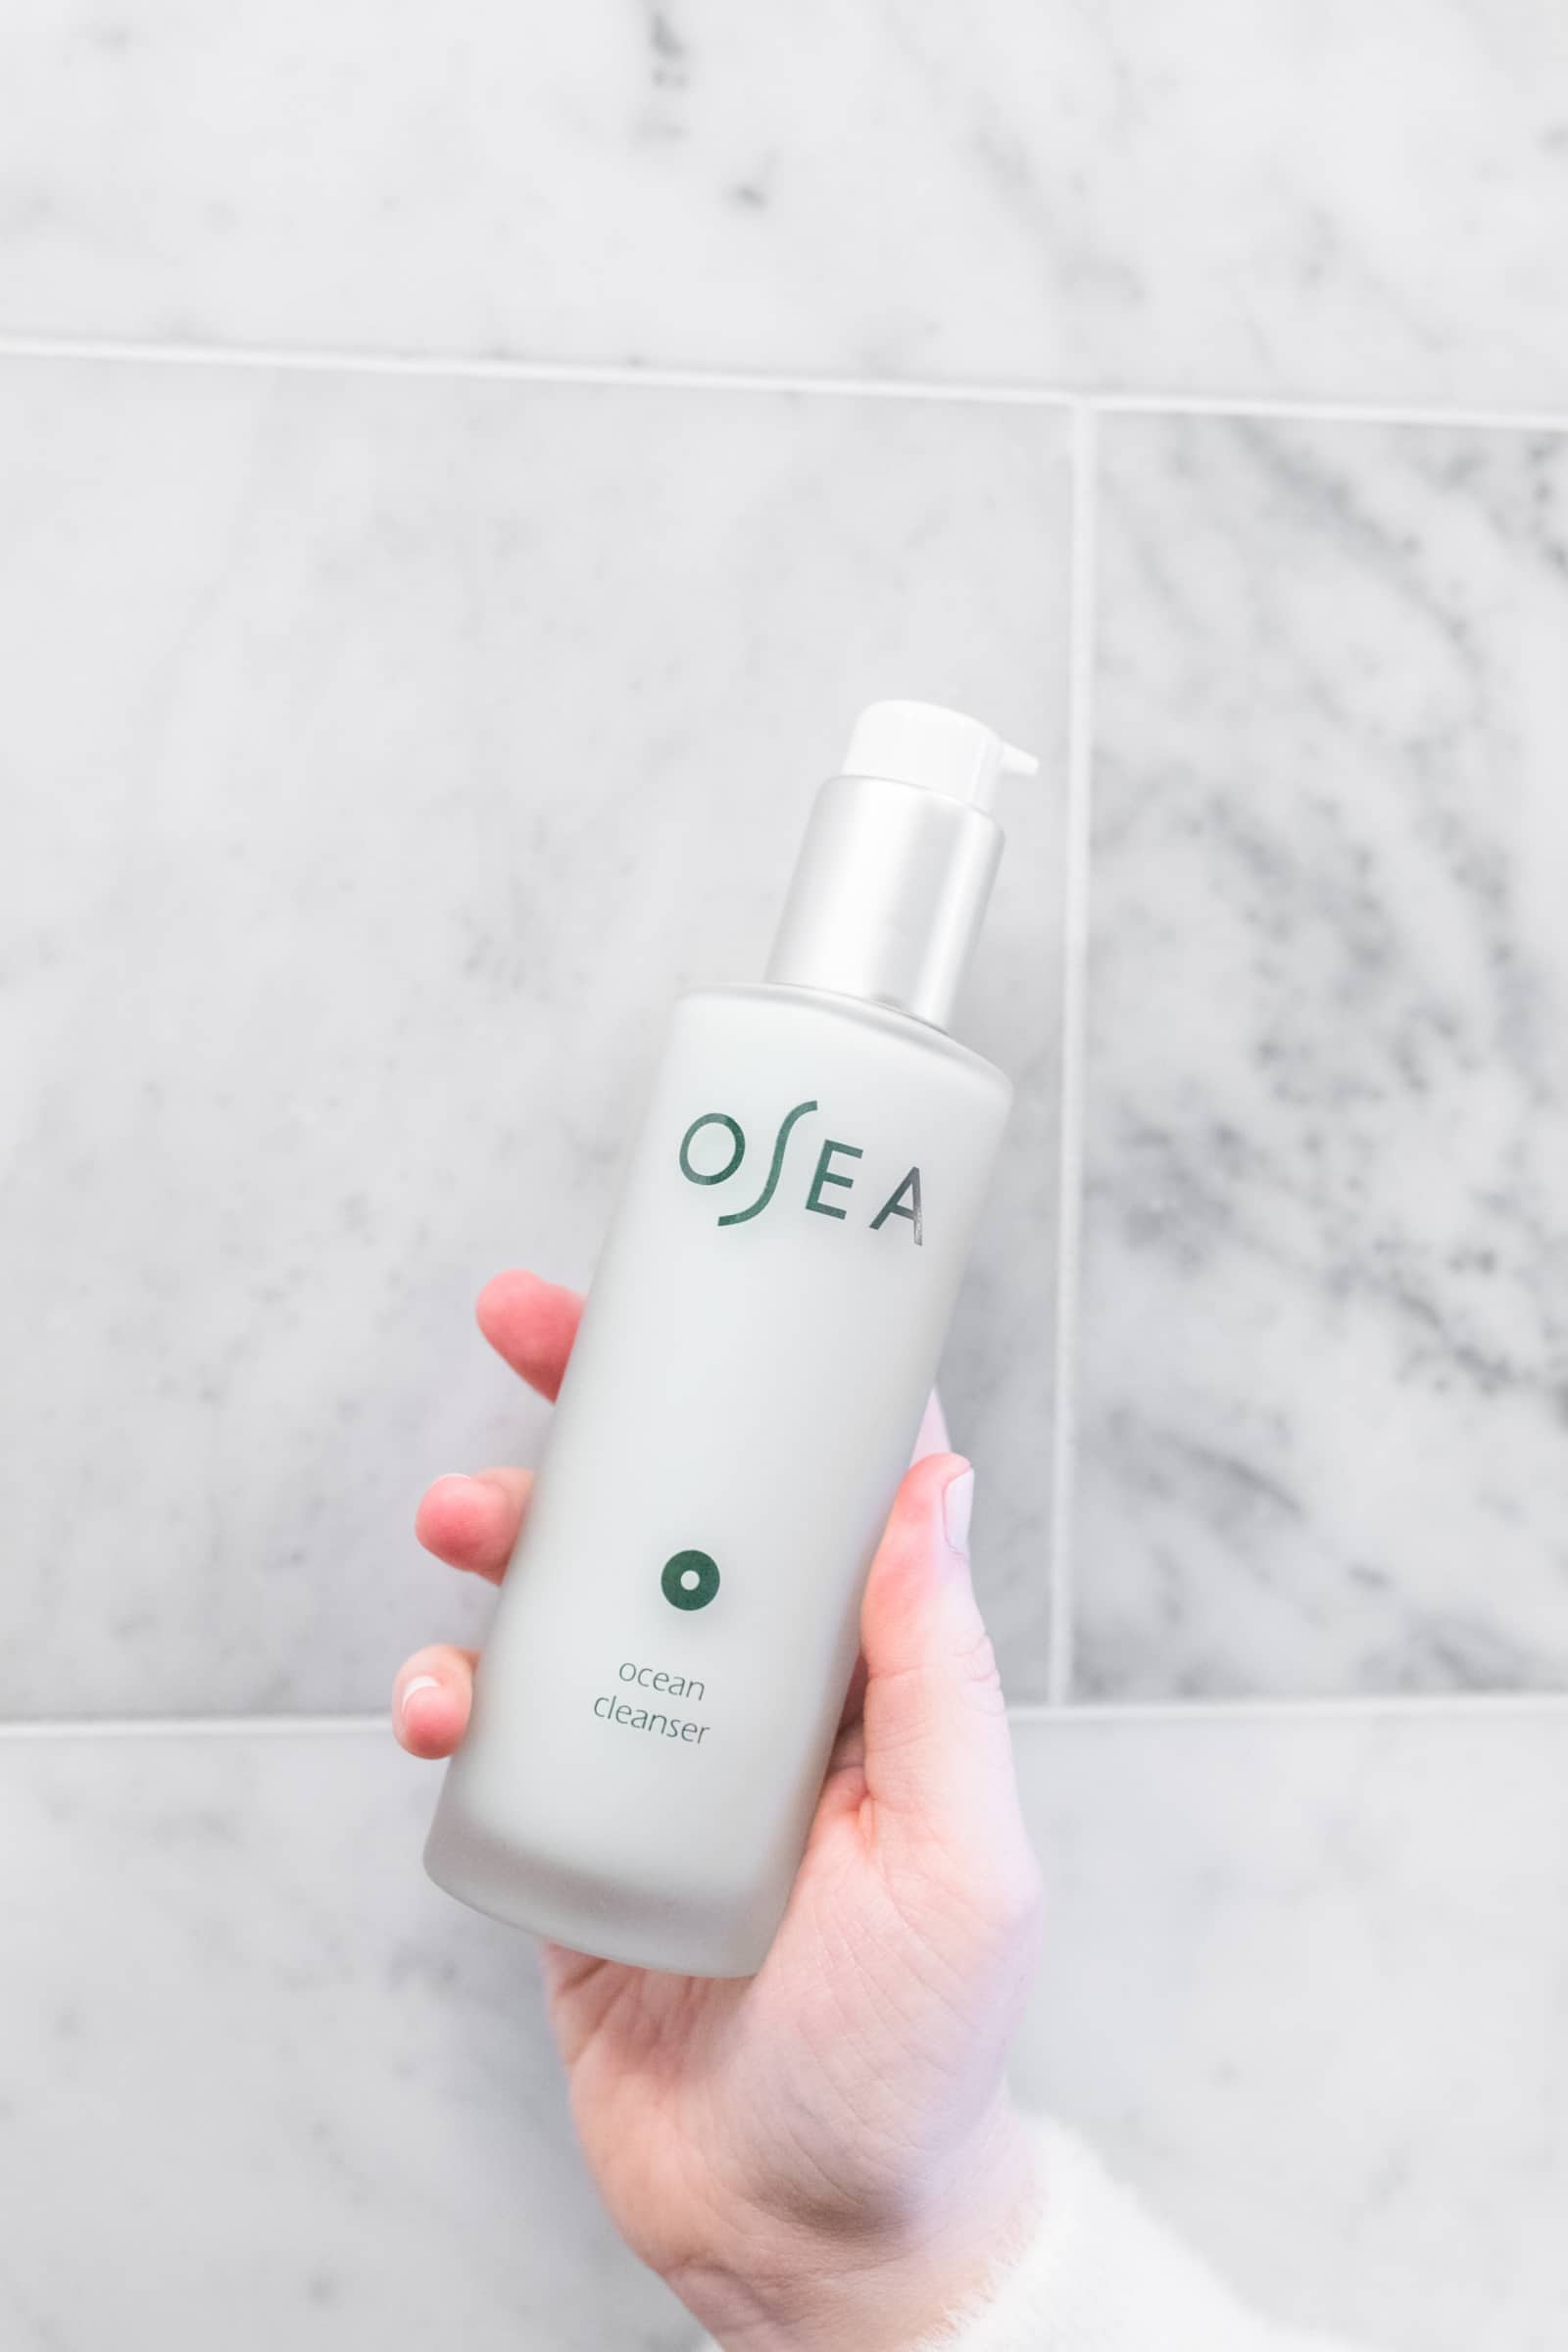 Osea Ocean Cleanser | Benefits of Clean Skincare